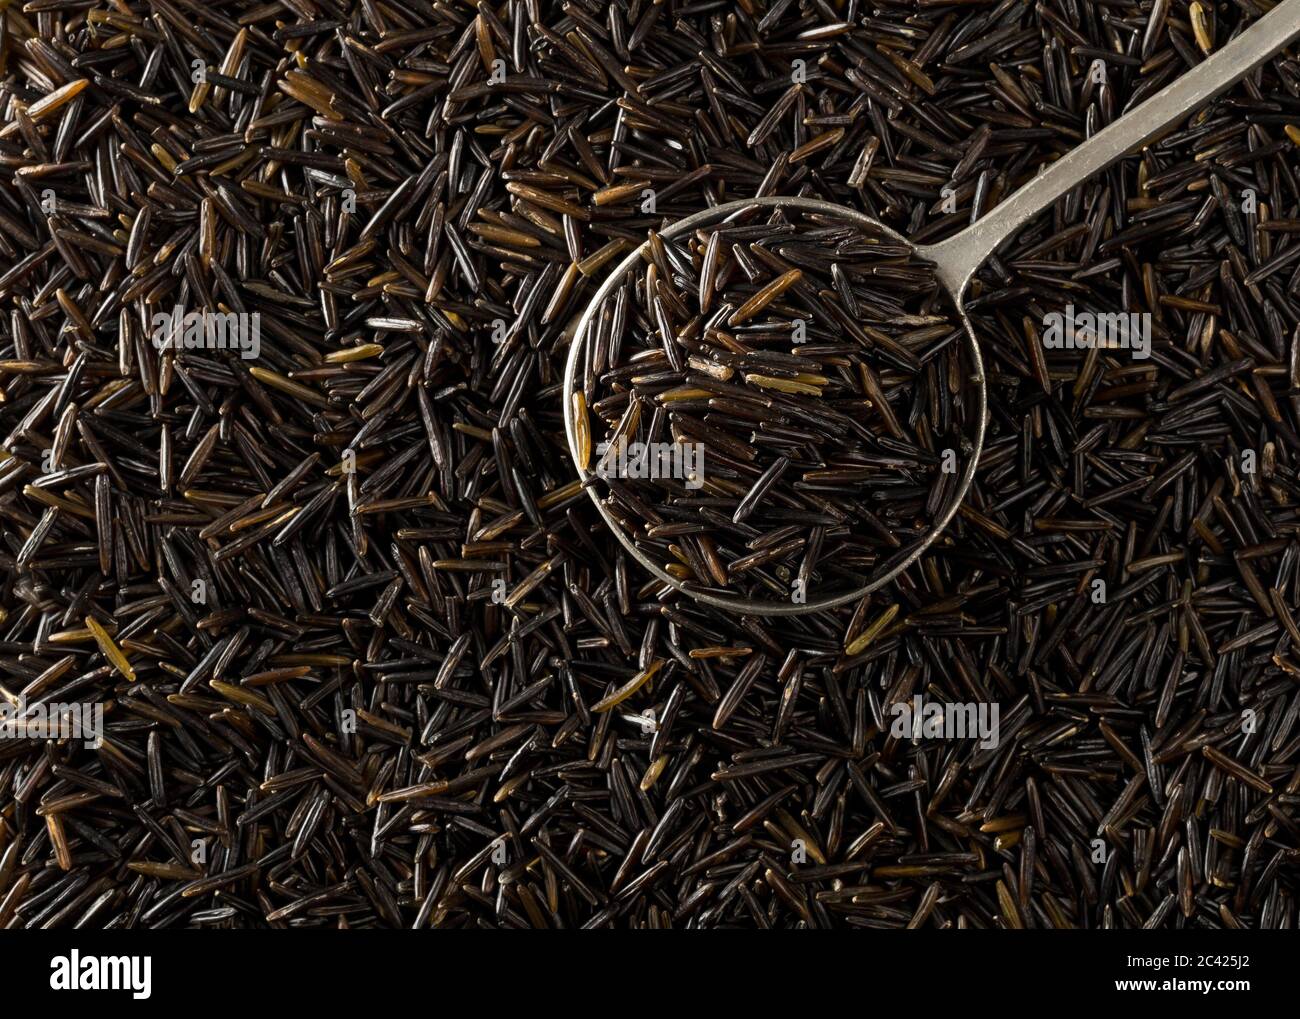 Heap of uncooked, raw, black wild rice grains in metal scoop on rice grain background, selective focus, flat lay top view from above Stock Photo